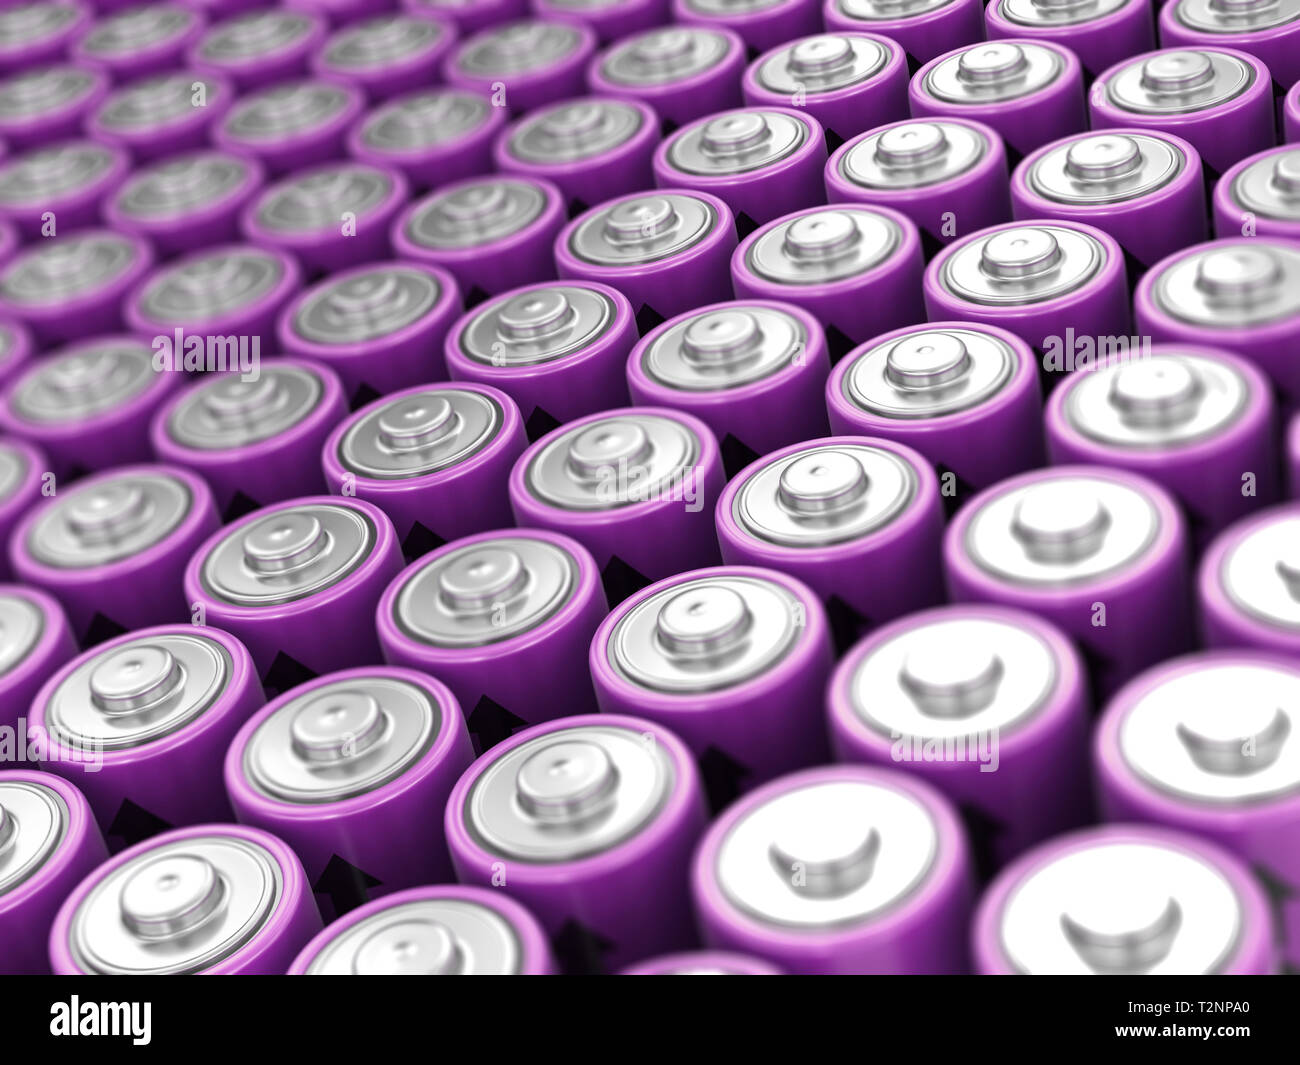 Image of Batteries background Stock Photo